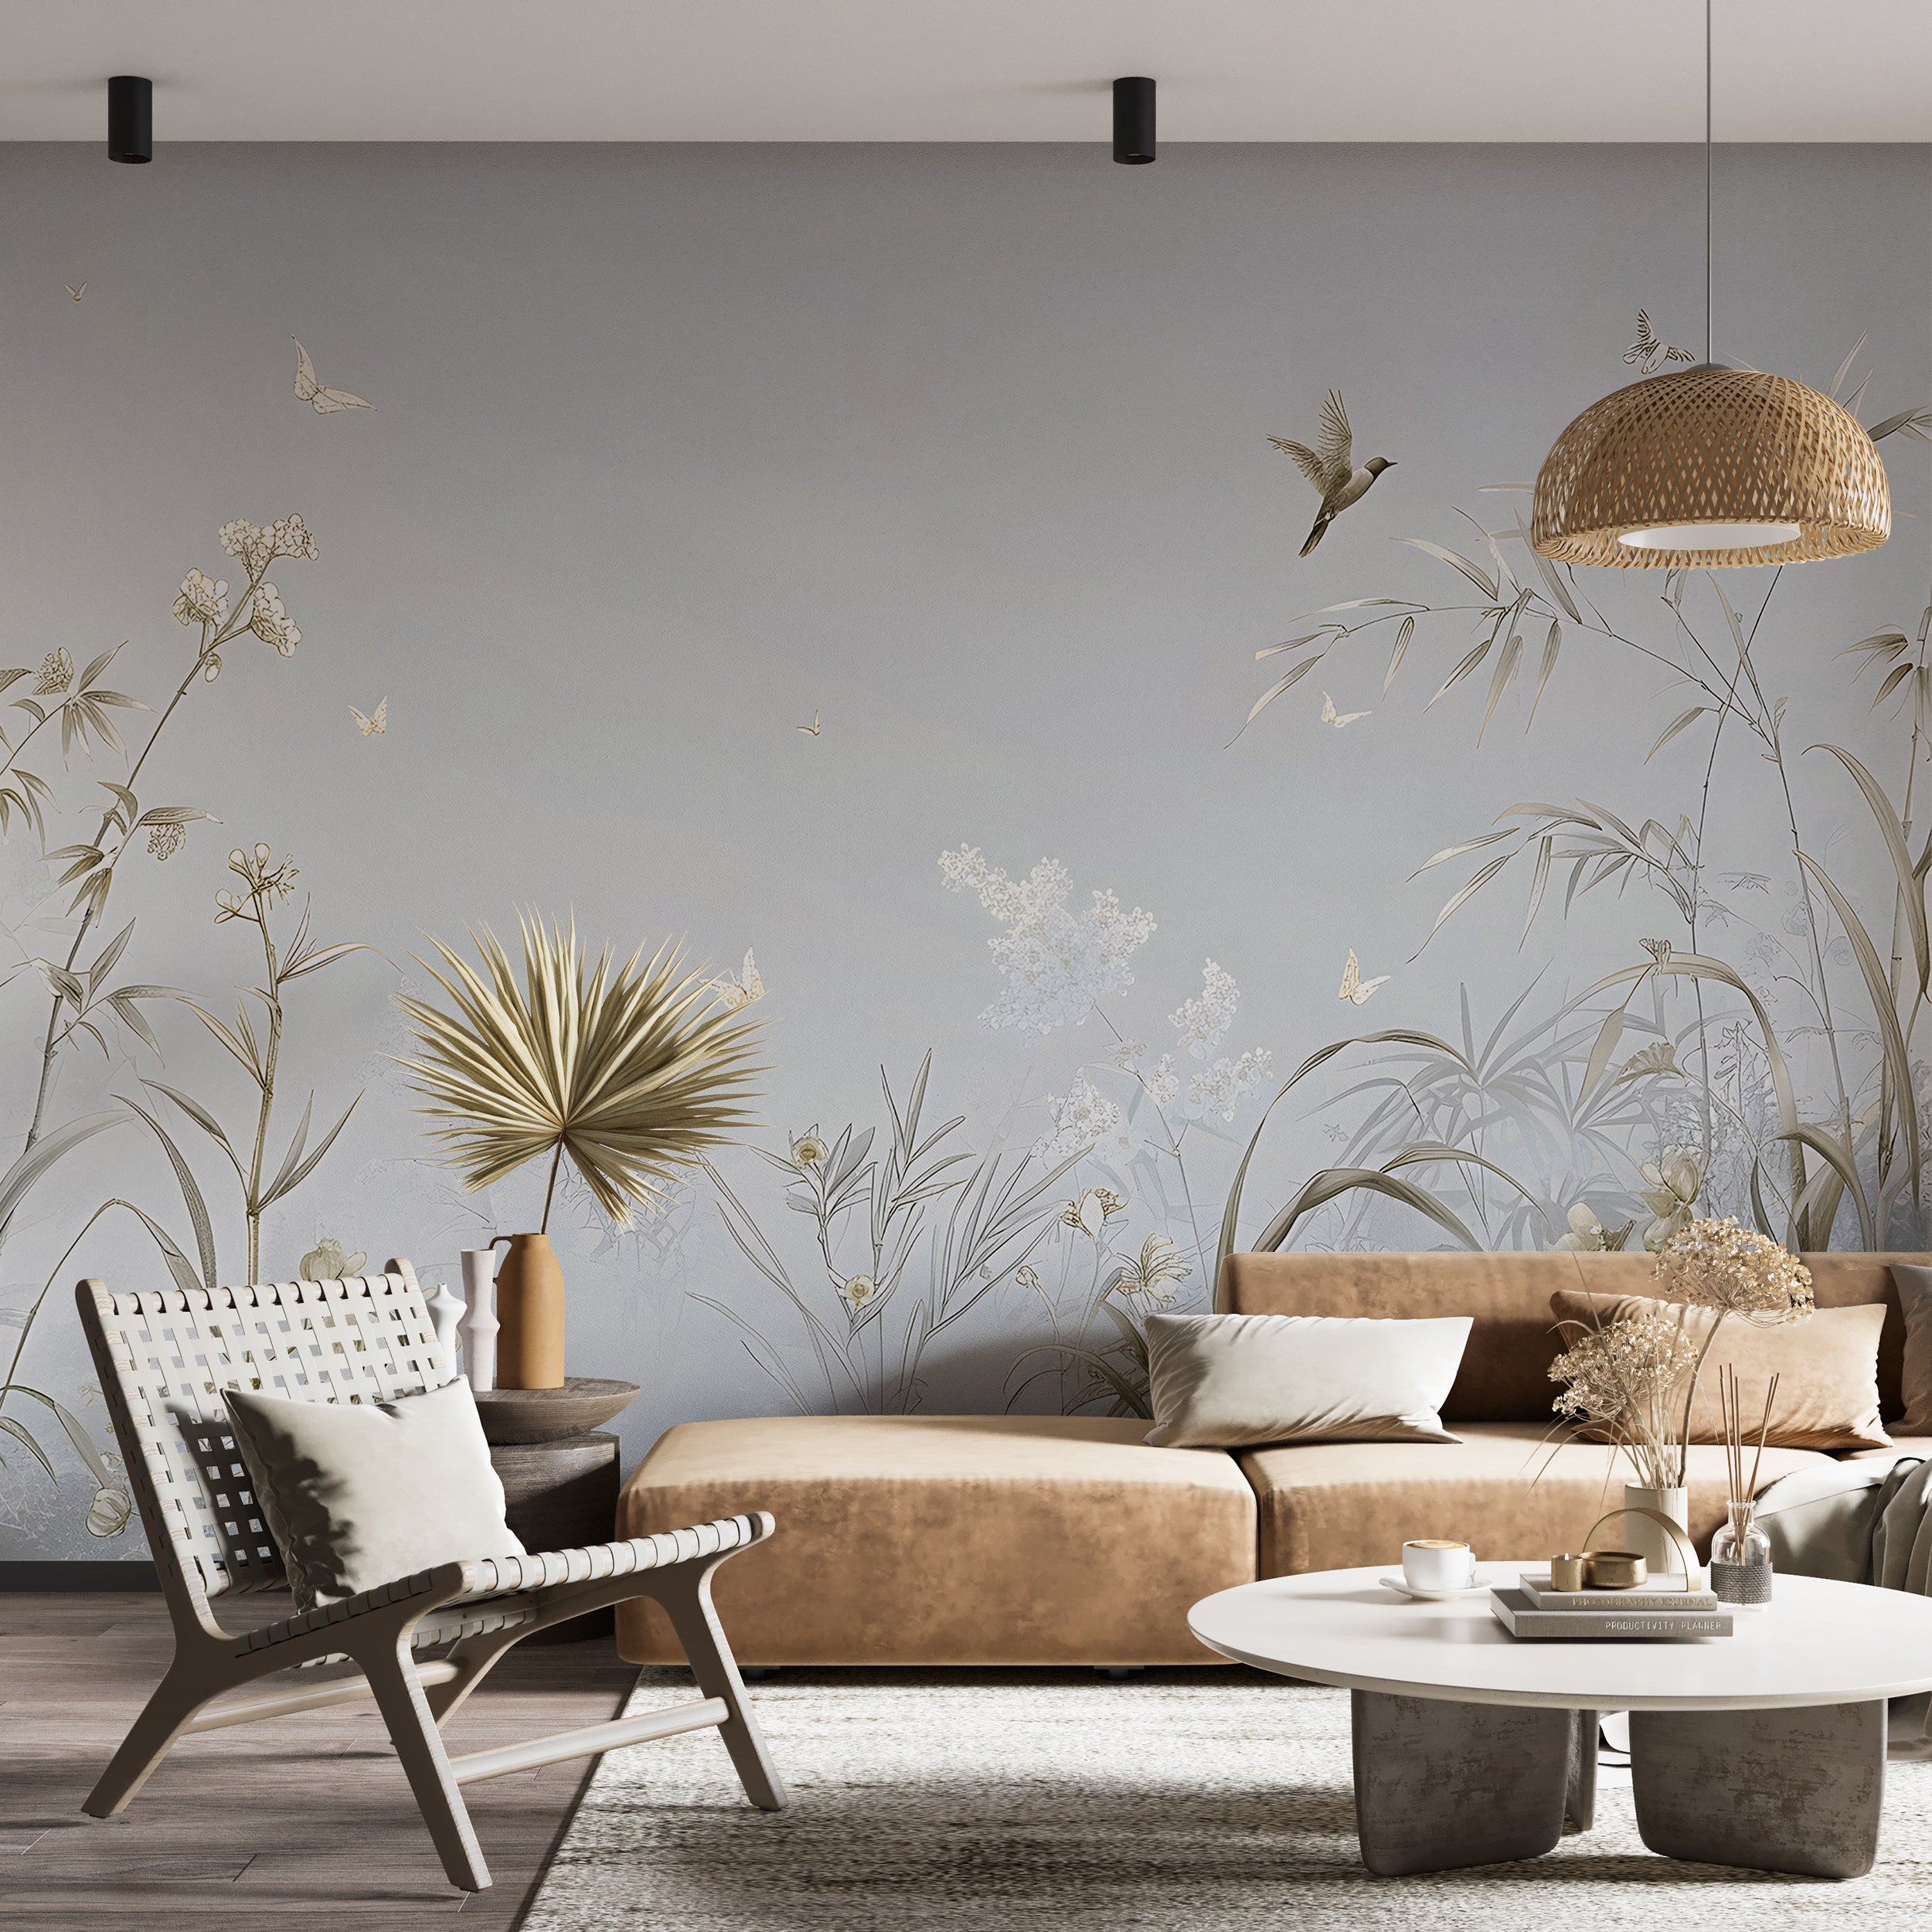 Tranquil floral wall decal in gentle hues